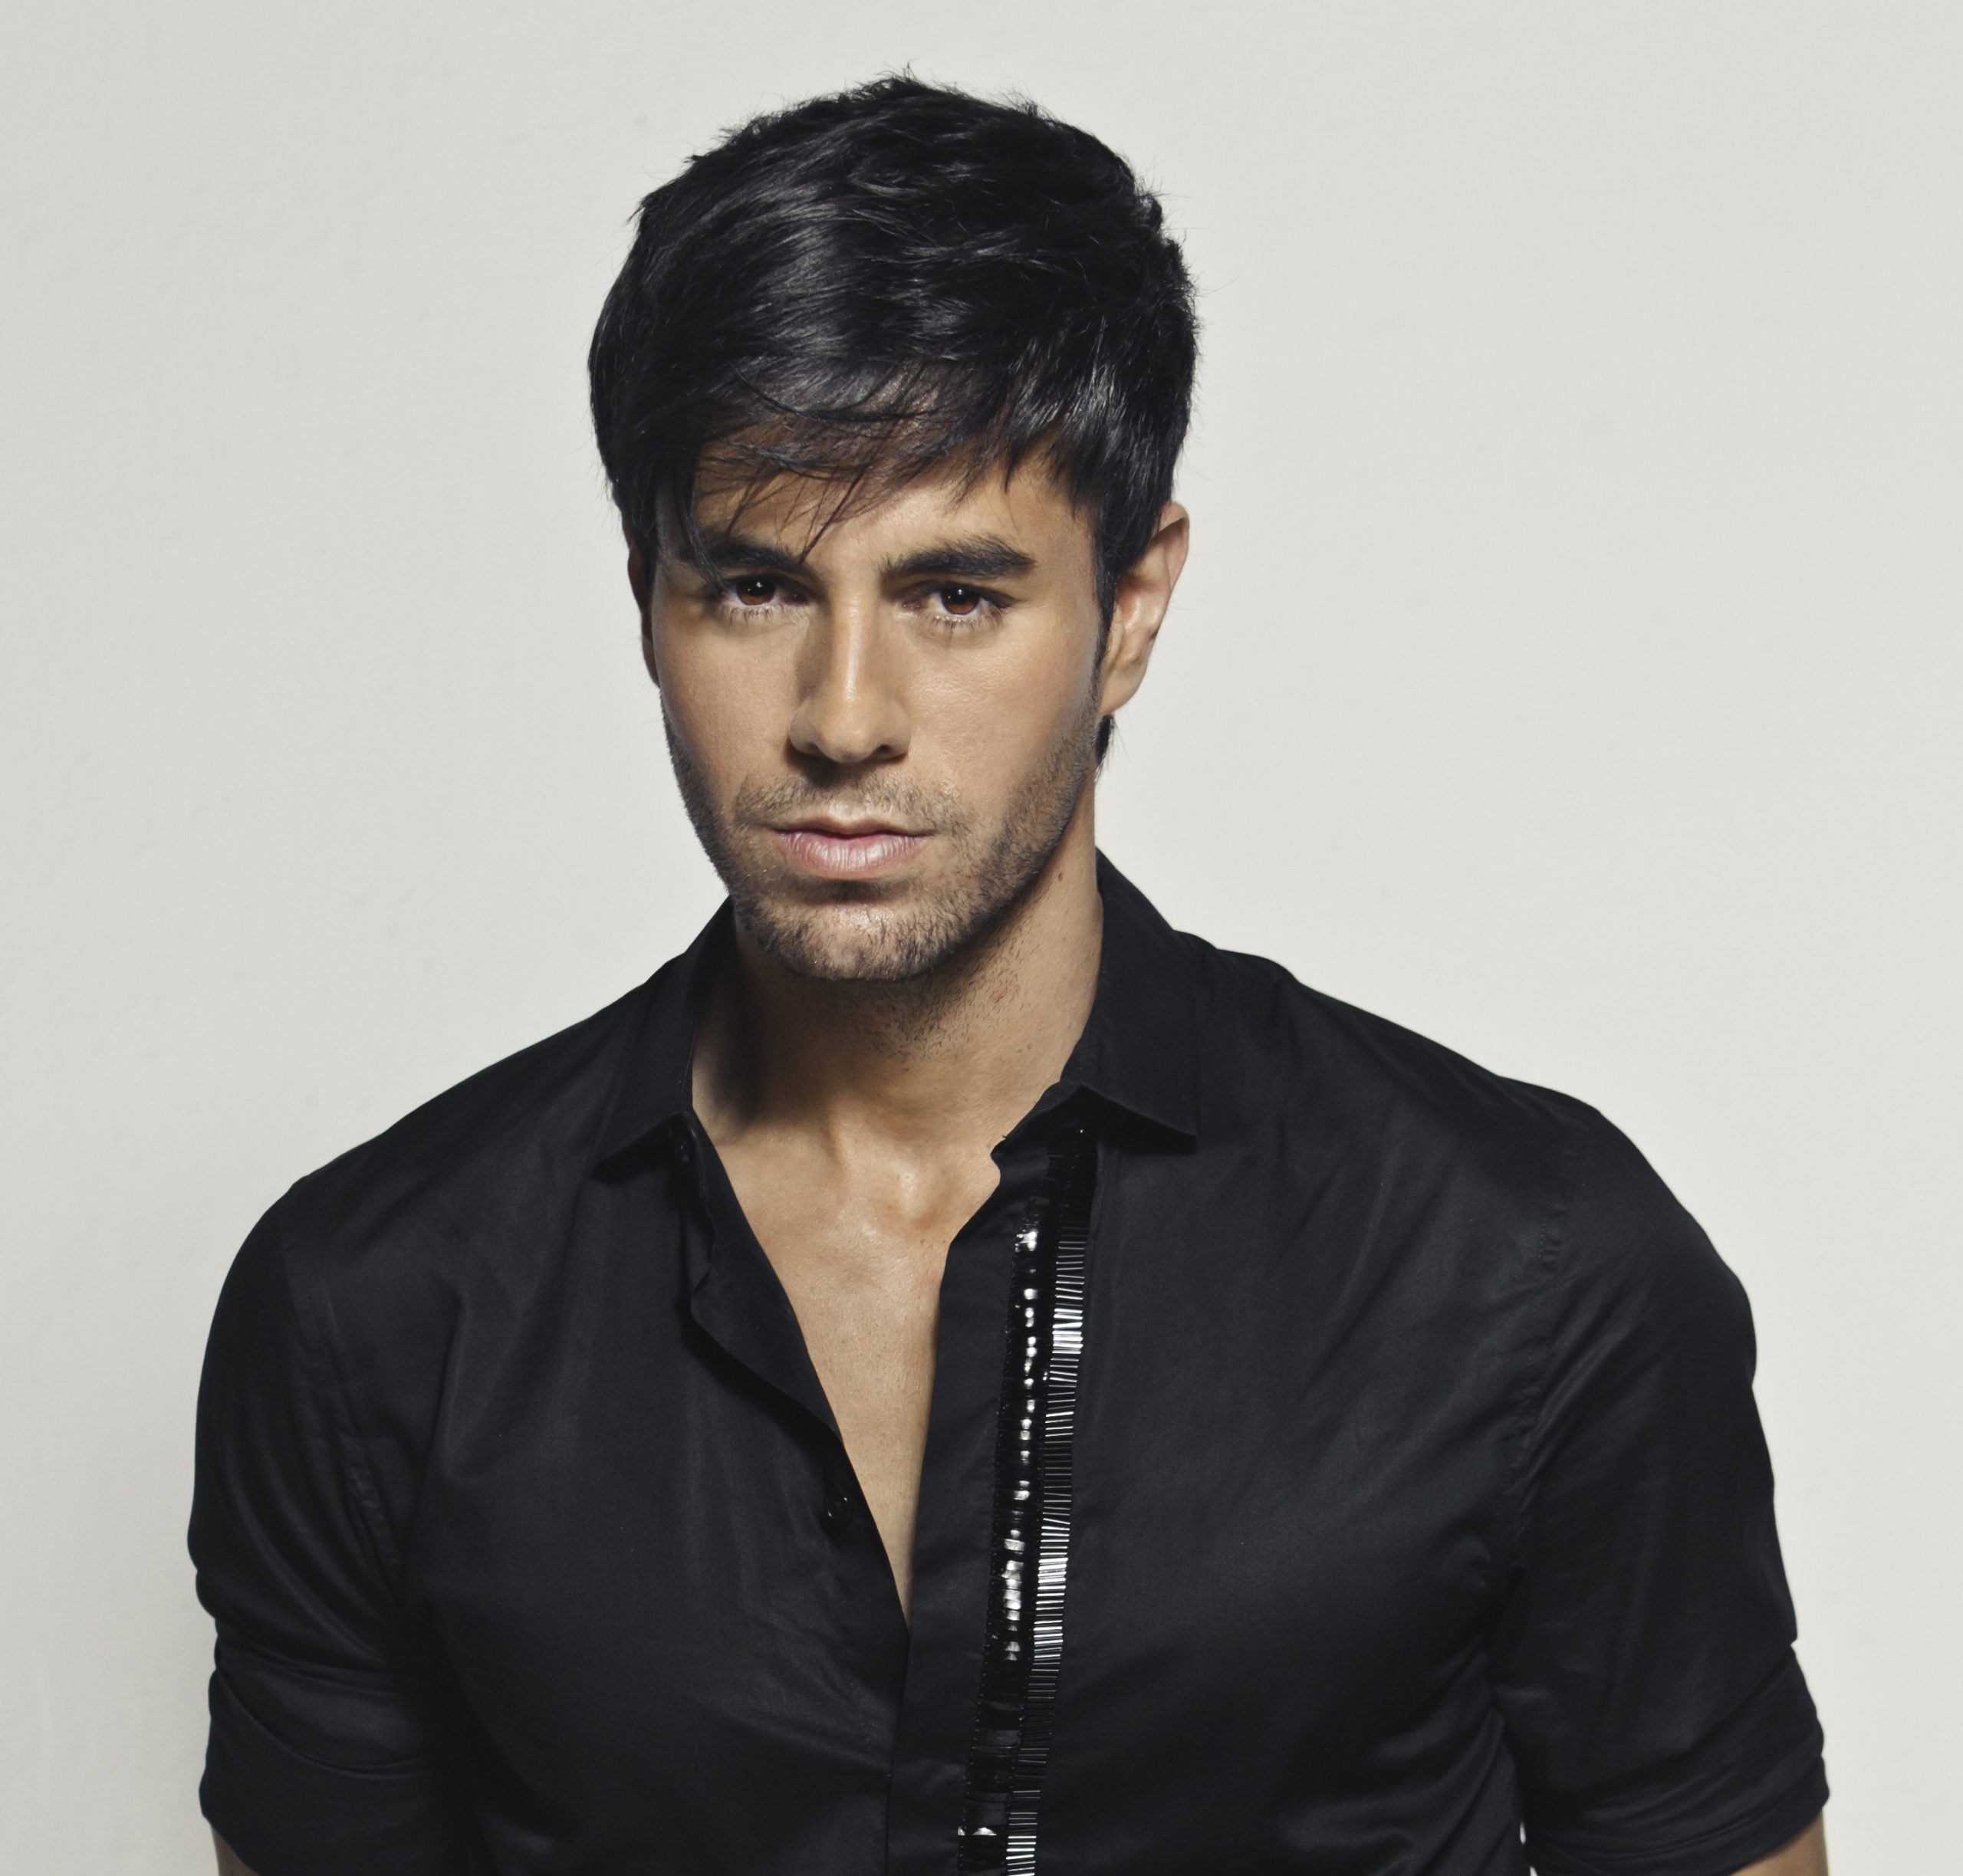 Enrique Iglesias to be recognized as Billboard's Top Latin Artist Of